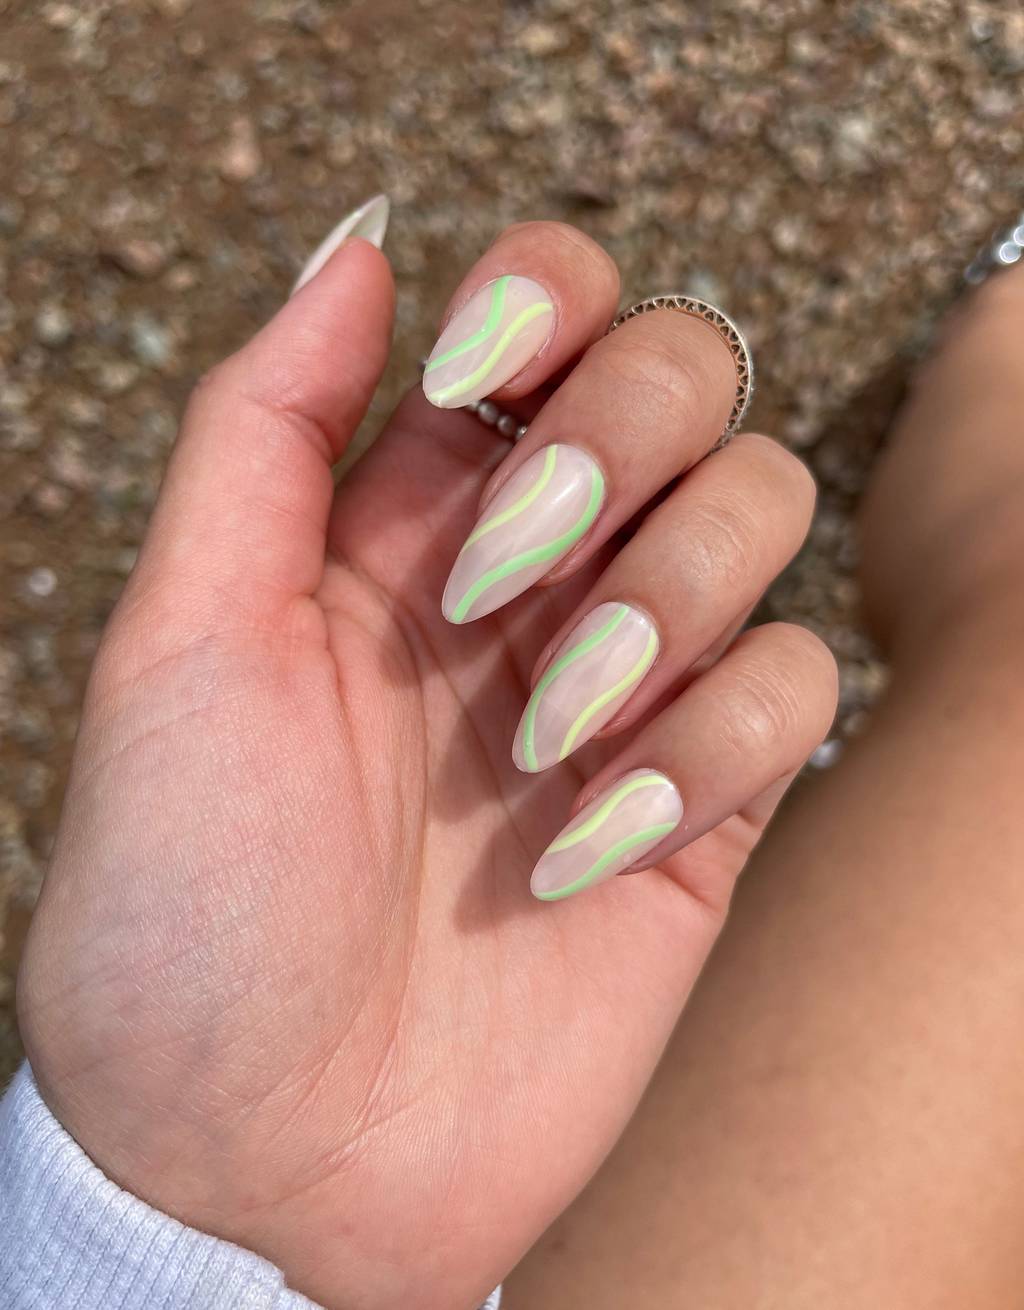 15 Trendy Green Nail Design Ideas to Try This Year - College Fashion